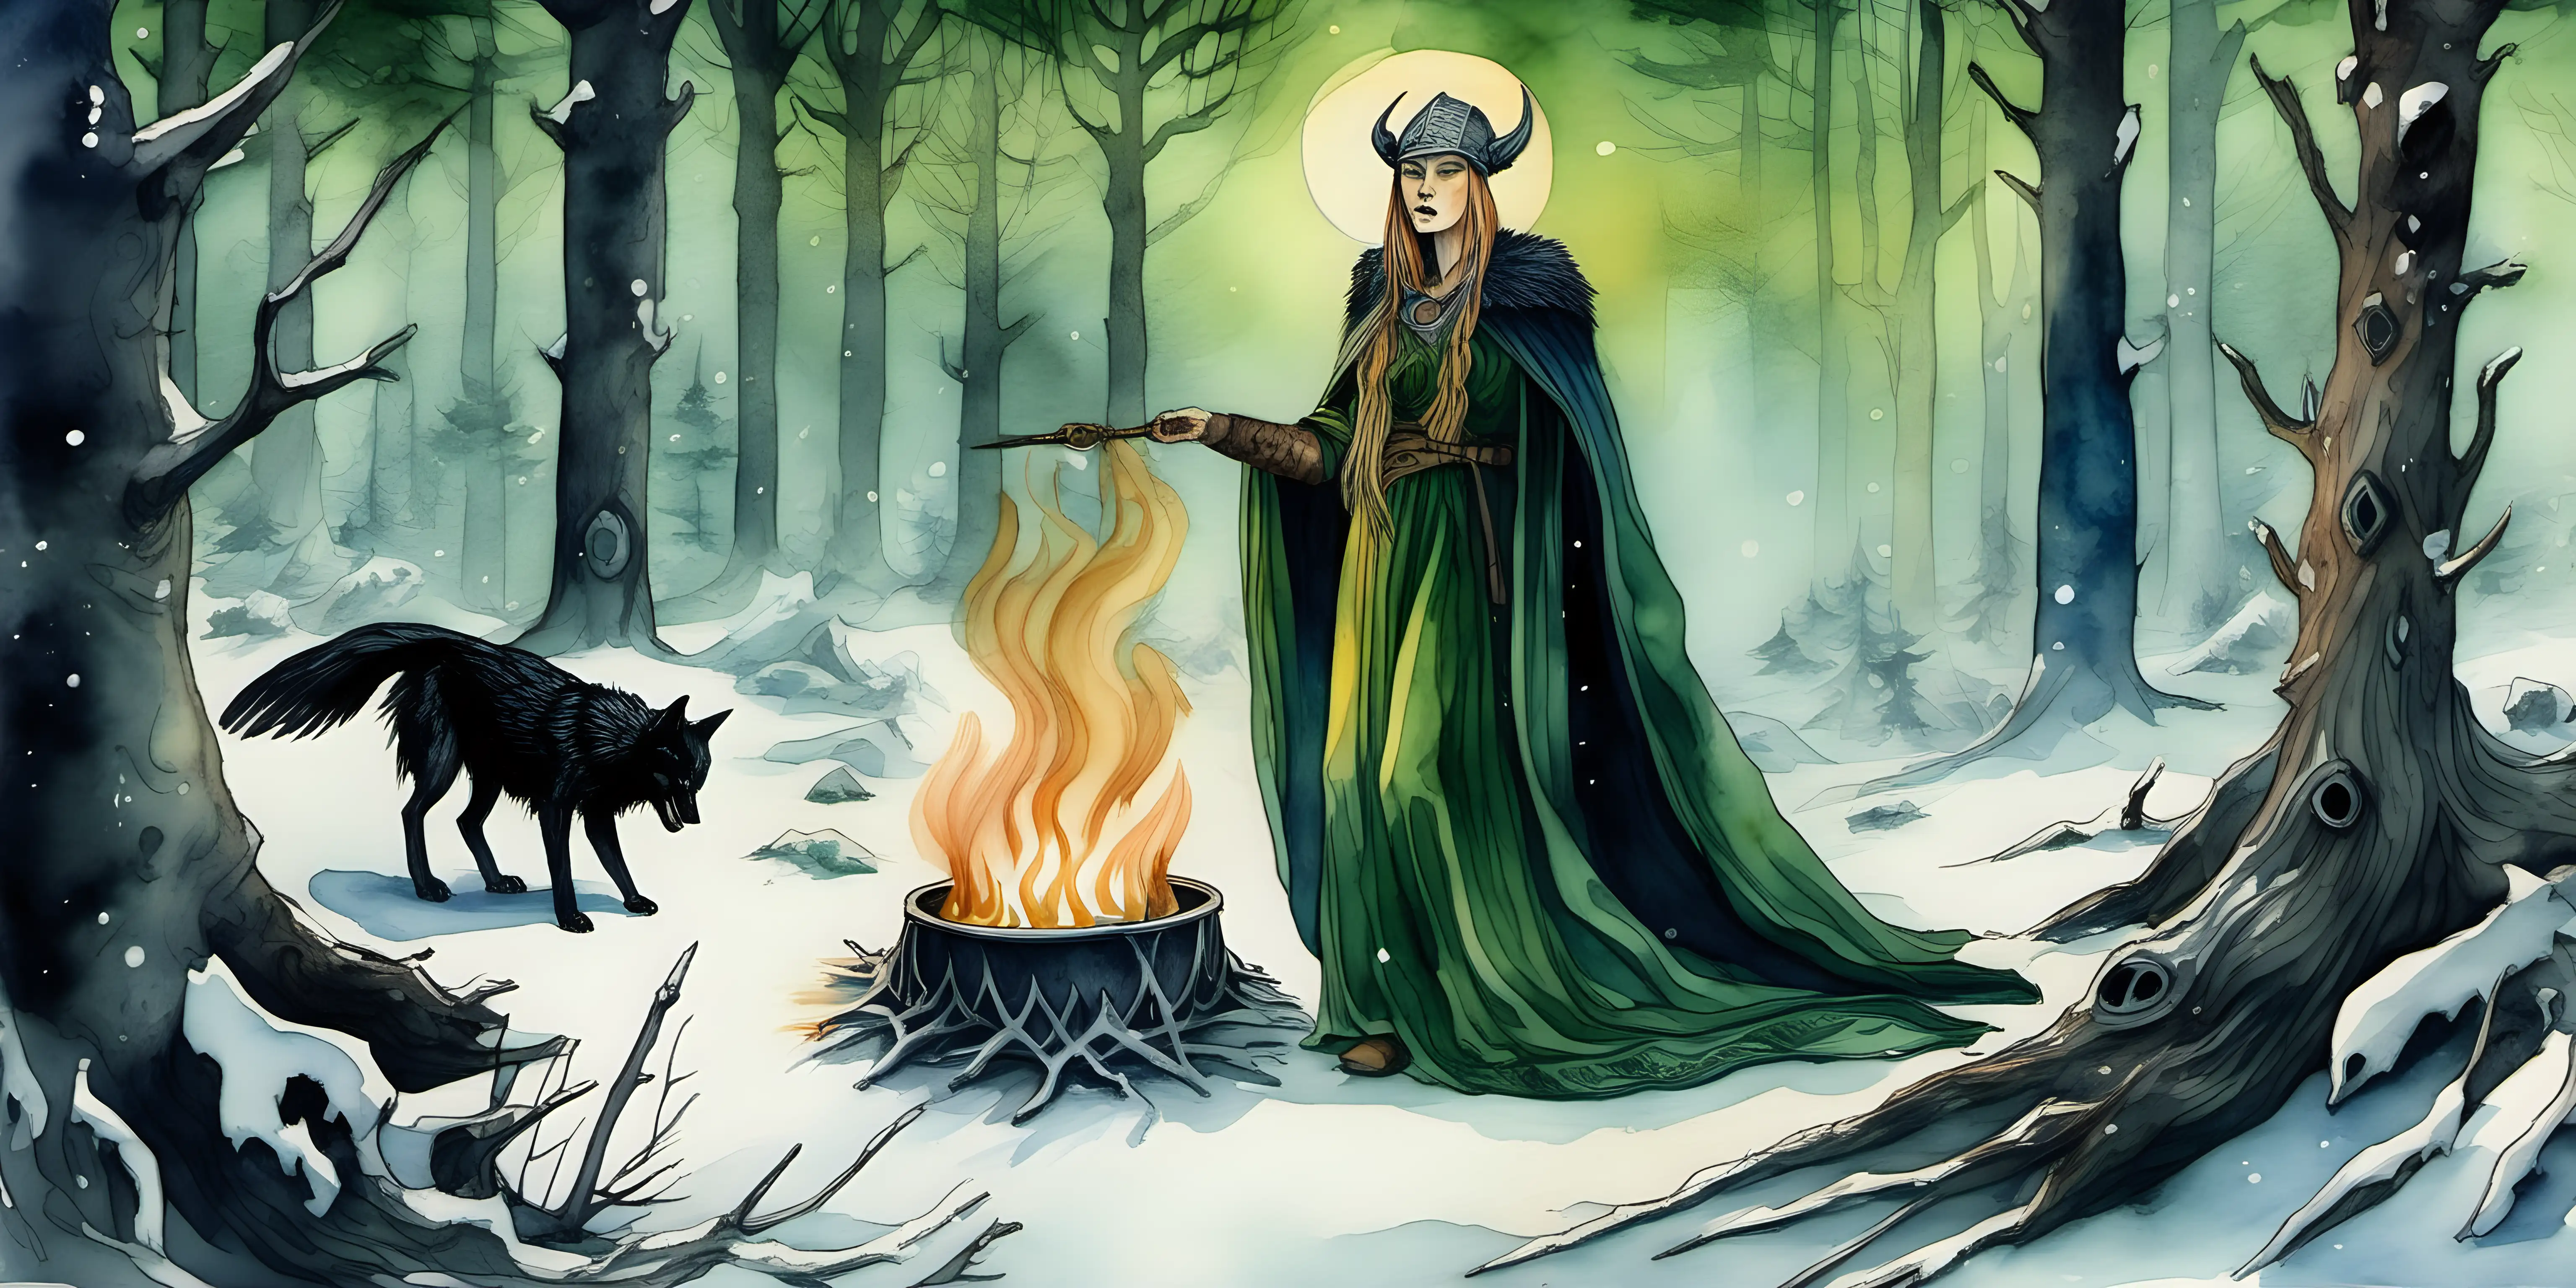 Viking Sorceress Painting with Raven and Wolf in Ancient Pine Tree Forest